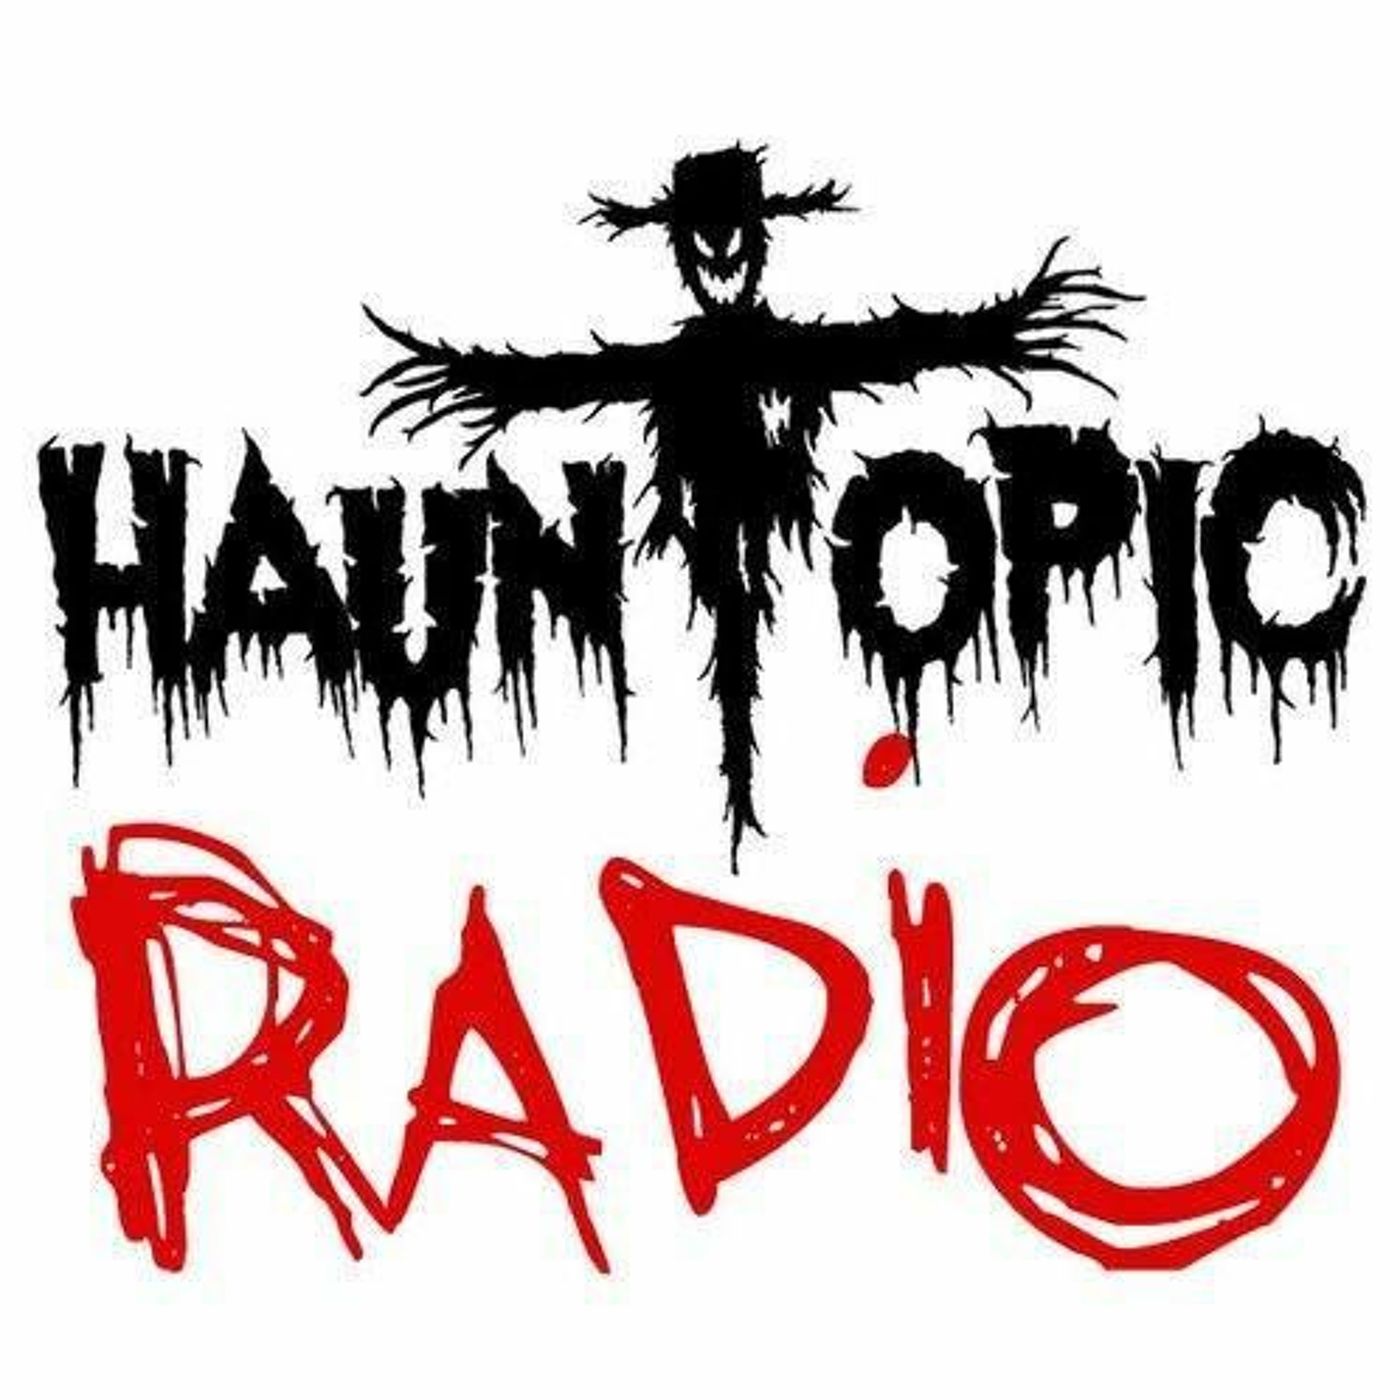 [HaunTopic Radio] How To Open Your Attraction in the Middle of a Pandemic with Spencer Terry